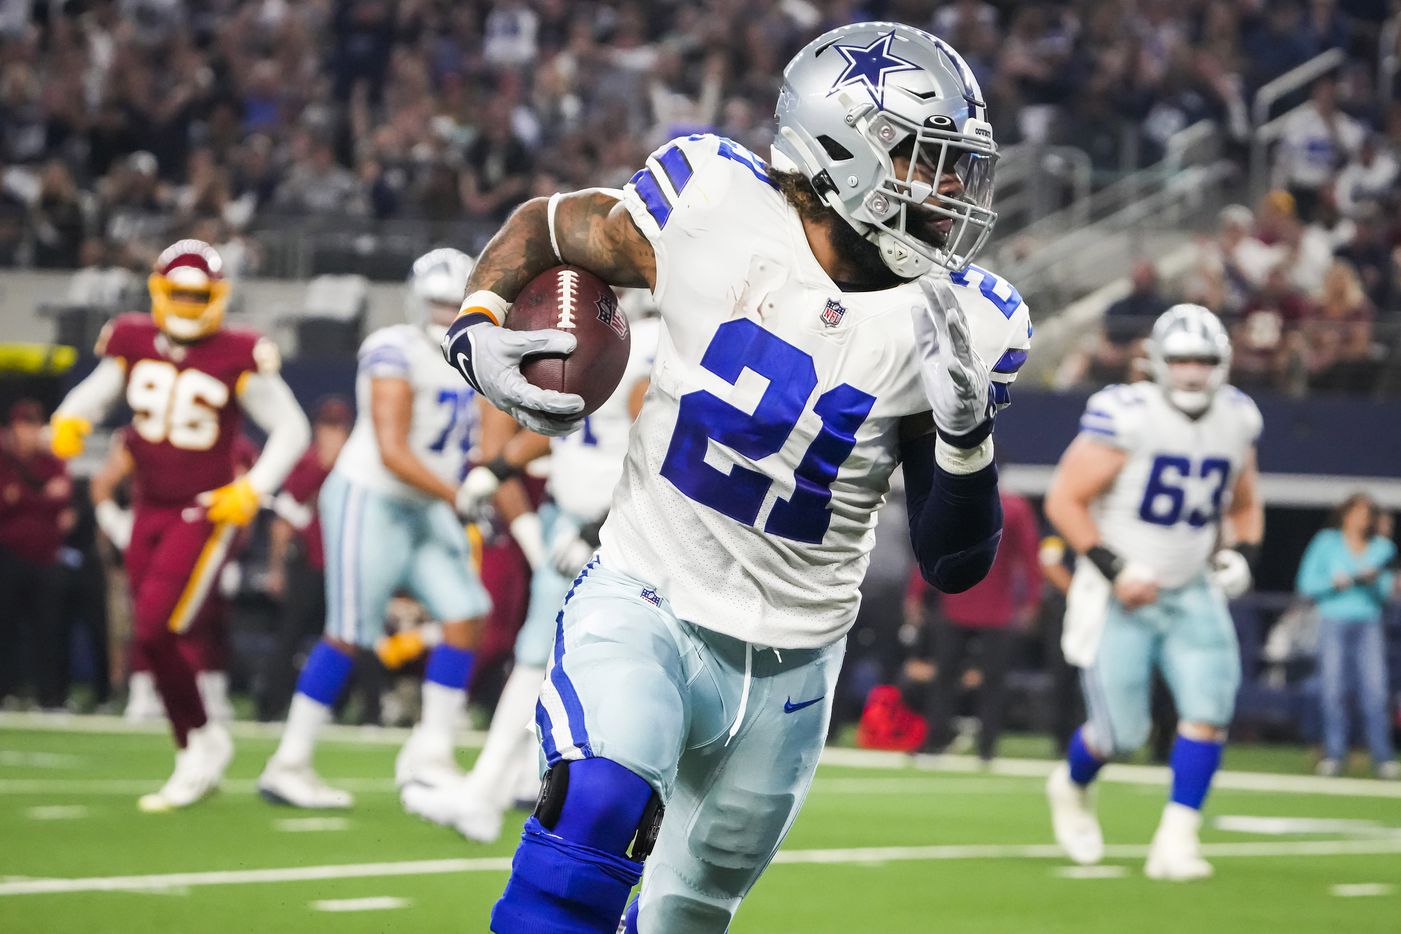 Dallas Cowboys running back Ezekiel Elliott (21) scores on a pass receptions during the first half of an NFL football game against the Washington Football Team at AT&T Stadium on Sunday, Dec. 26, 2021, in Arlington.